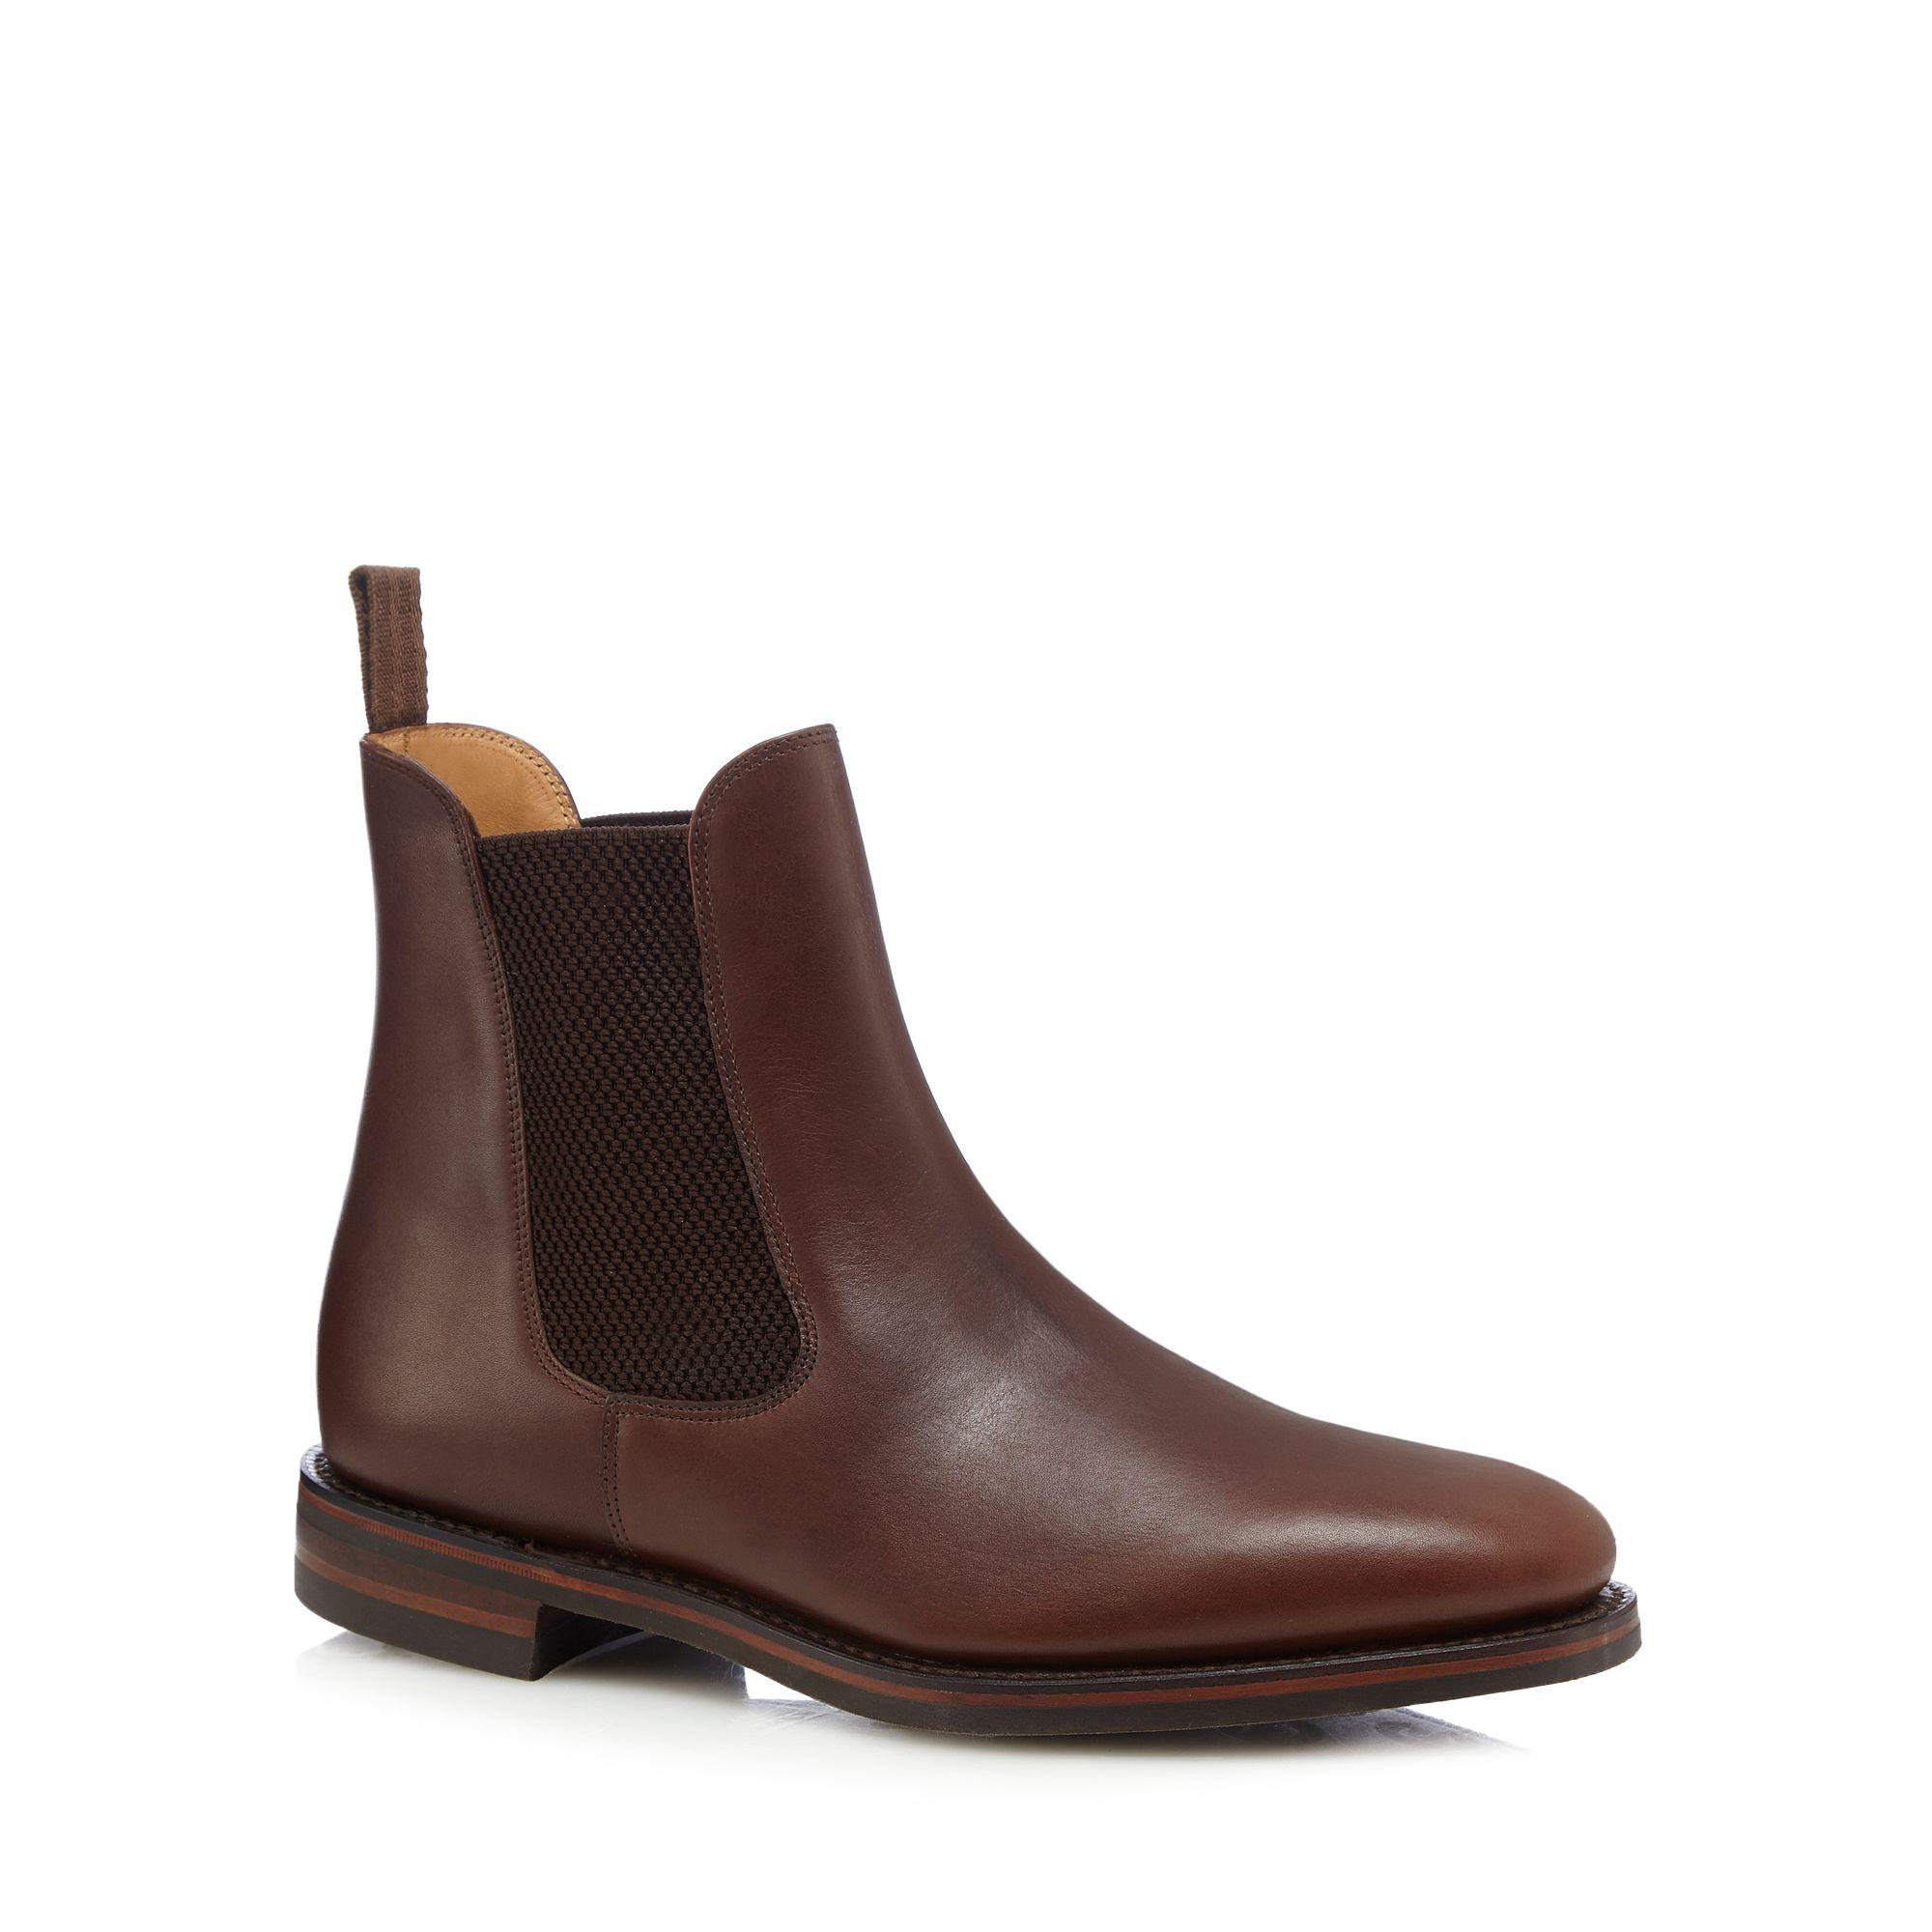 Loake Men's Leather 'blenheim' Chelsea Boots in Brown for Men - Lyst